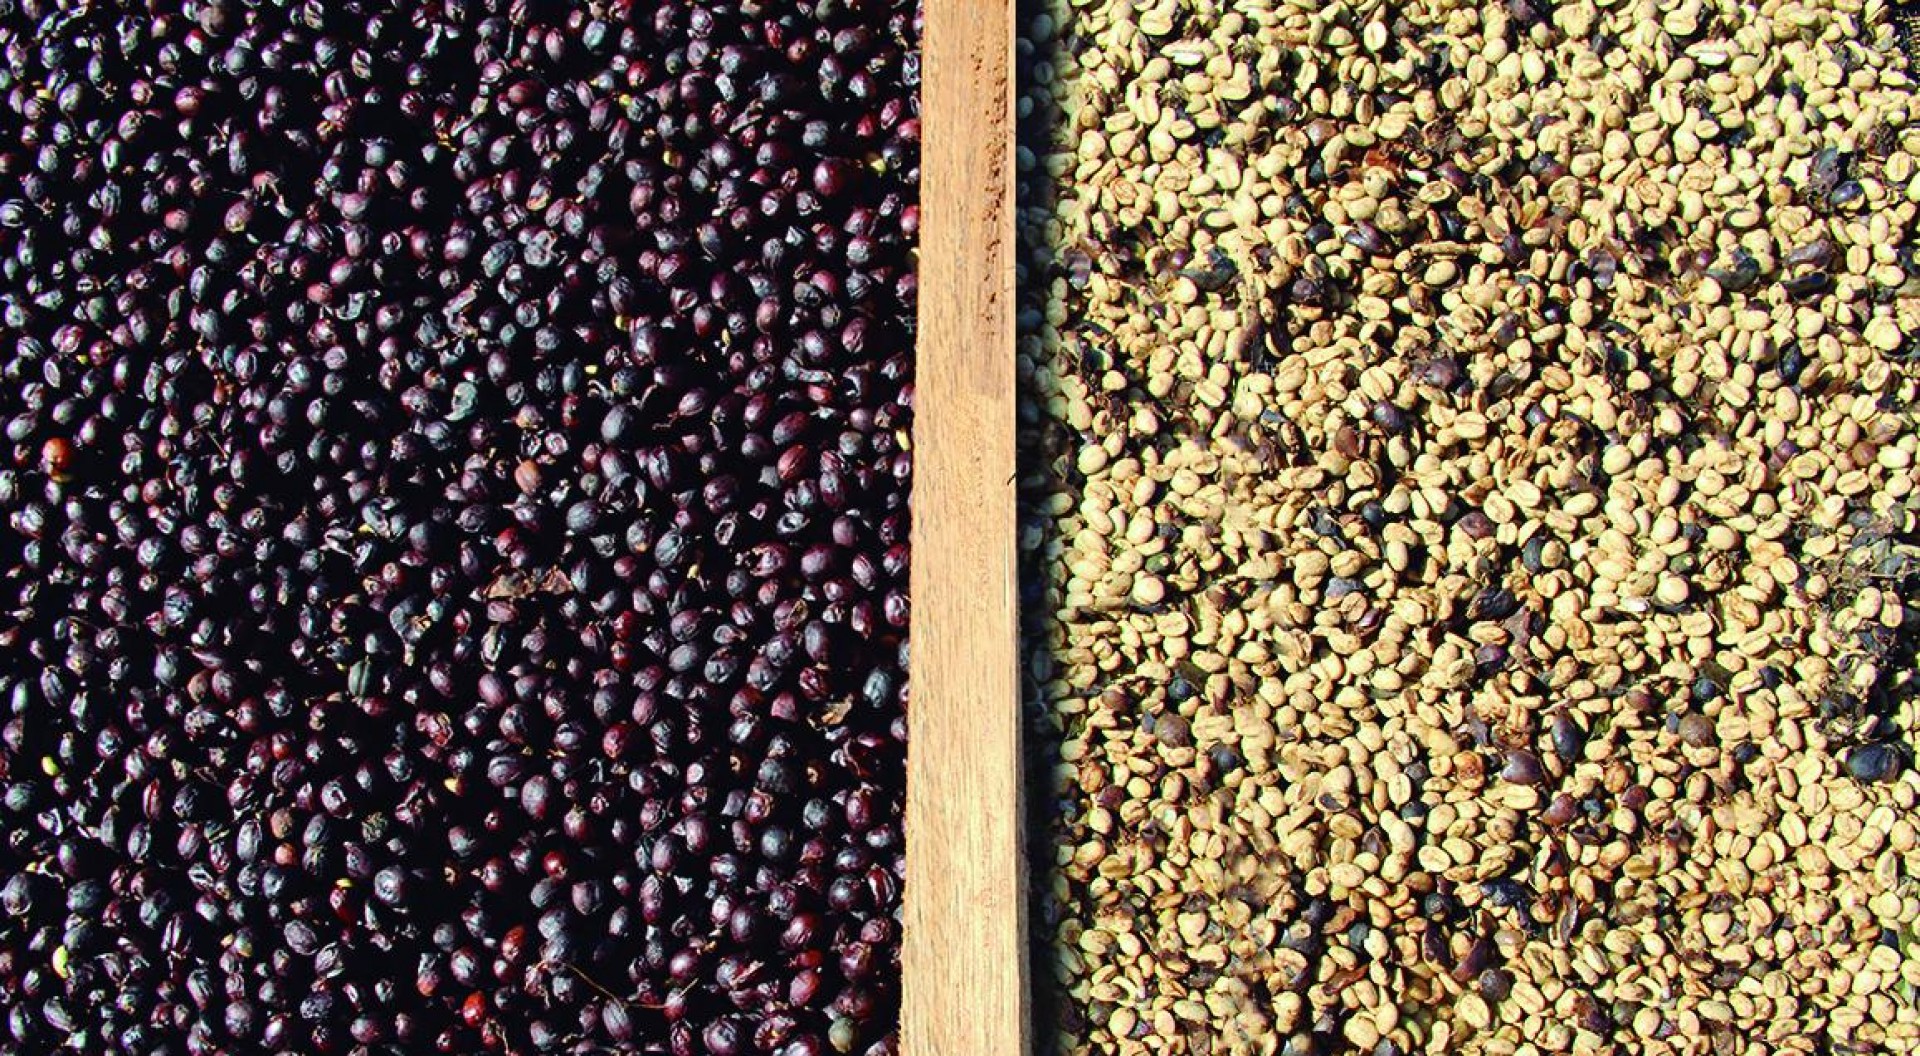 The differences between Natural coffee and the Pulped Natural